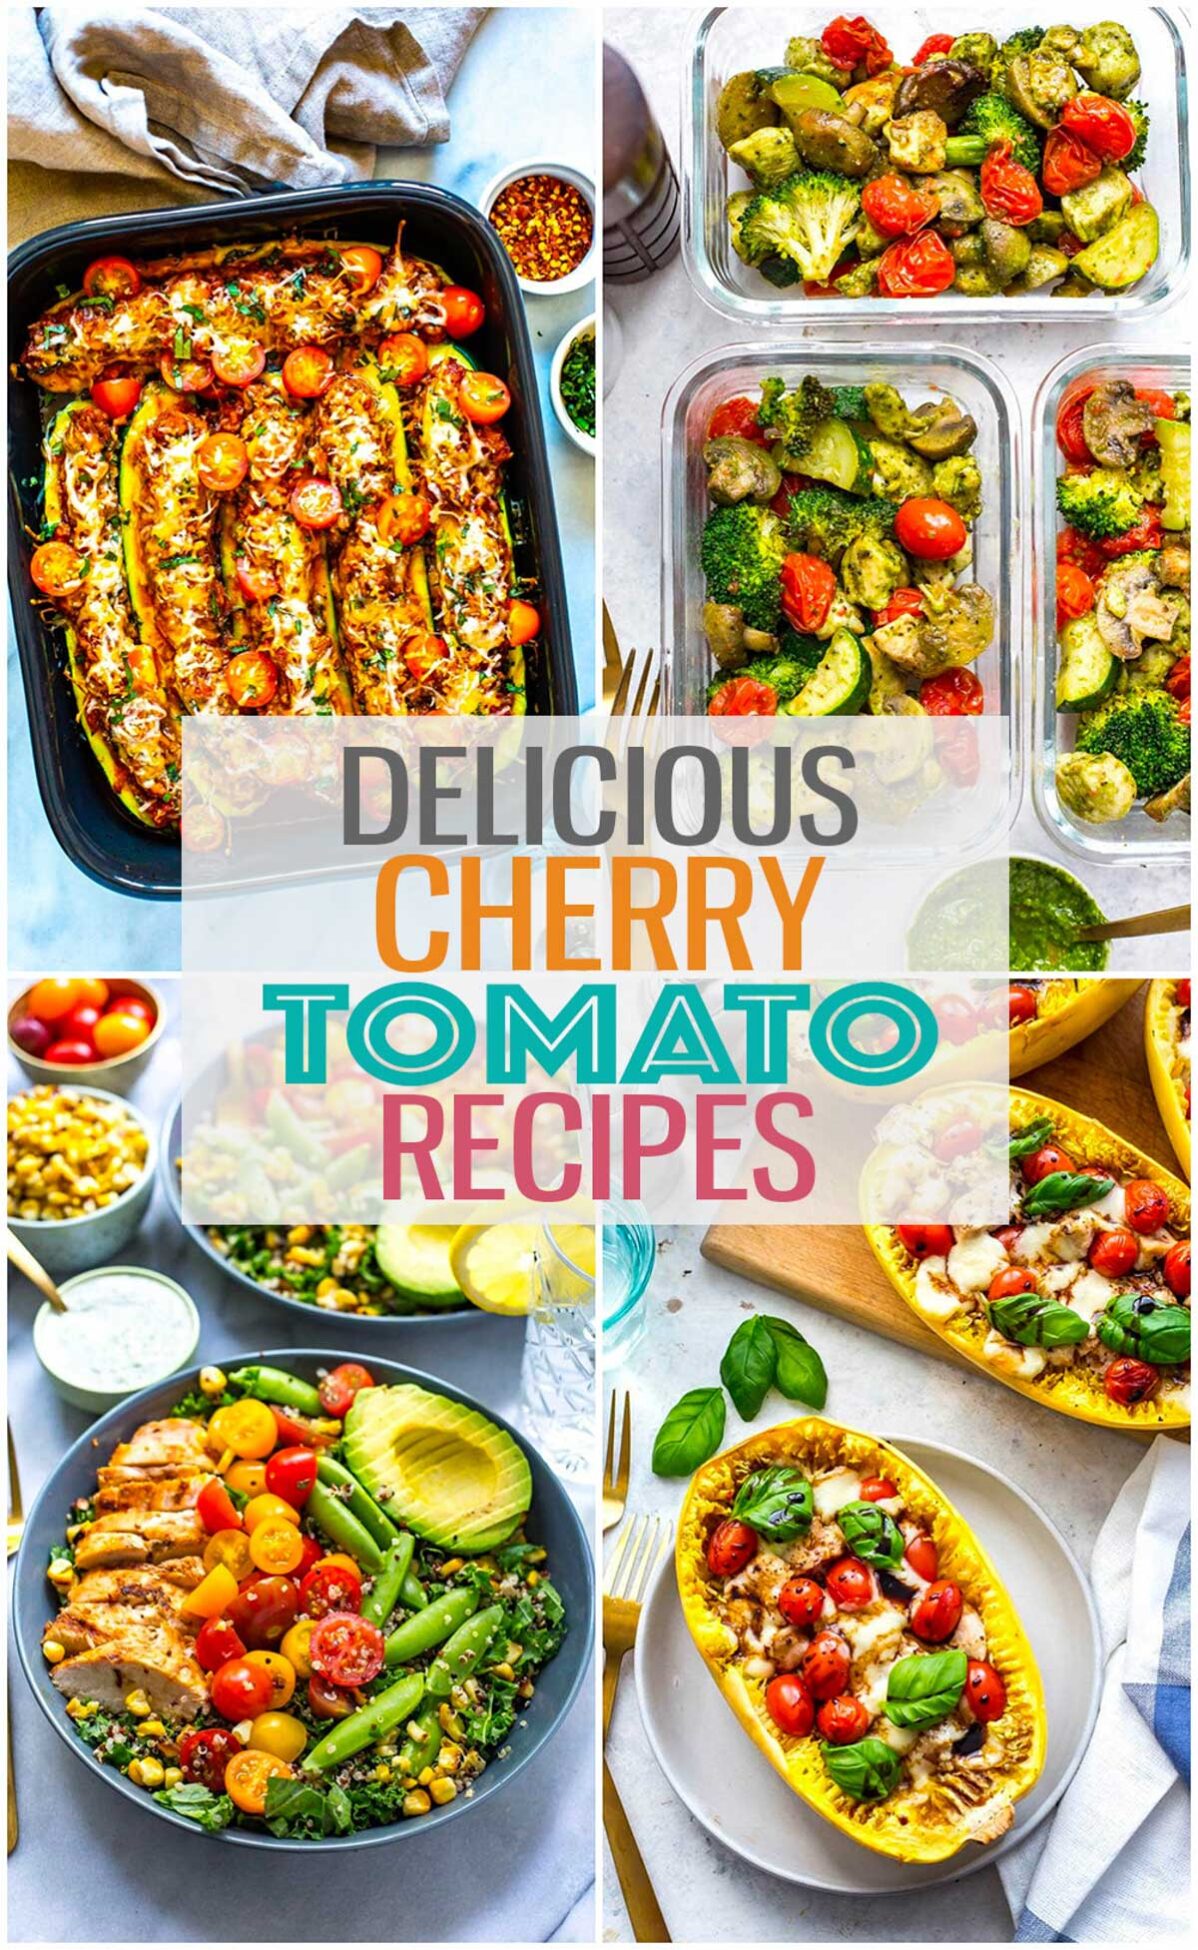 A collage of four different cherry tomato recipes with the text "Delicious Cherry Tomato Recipes" layered over top.